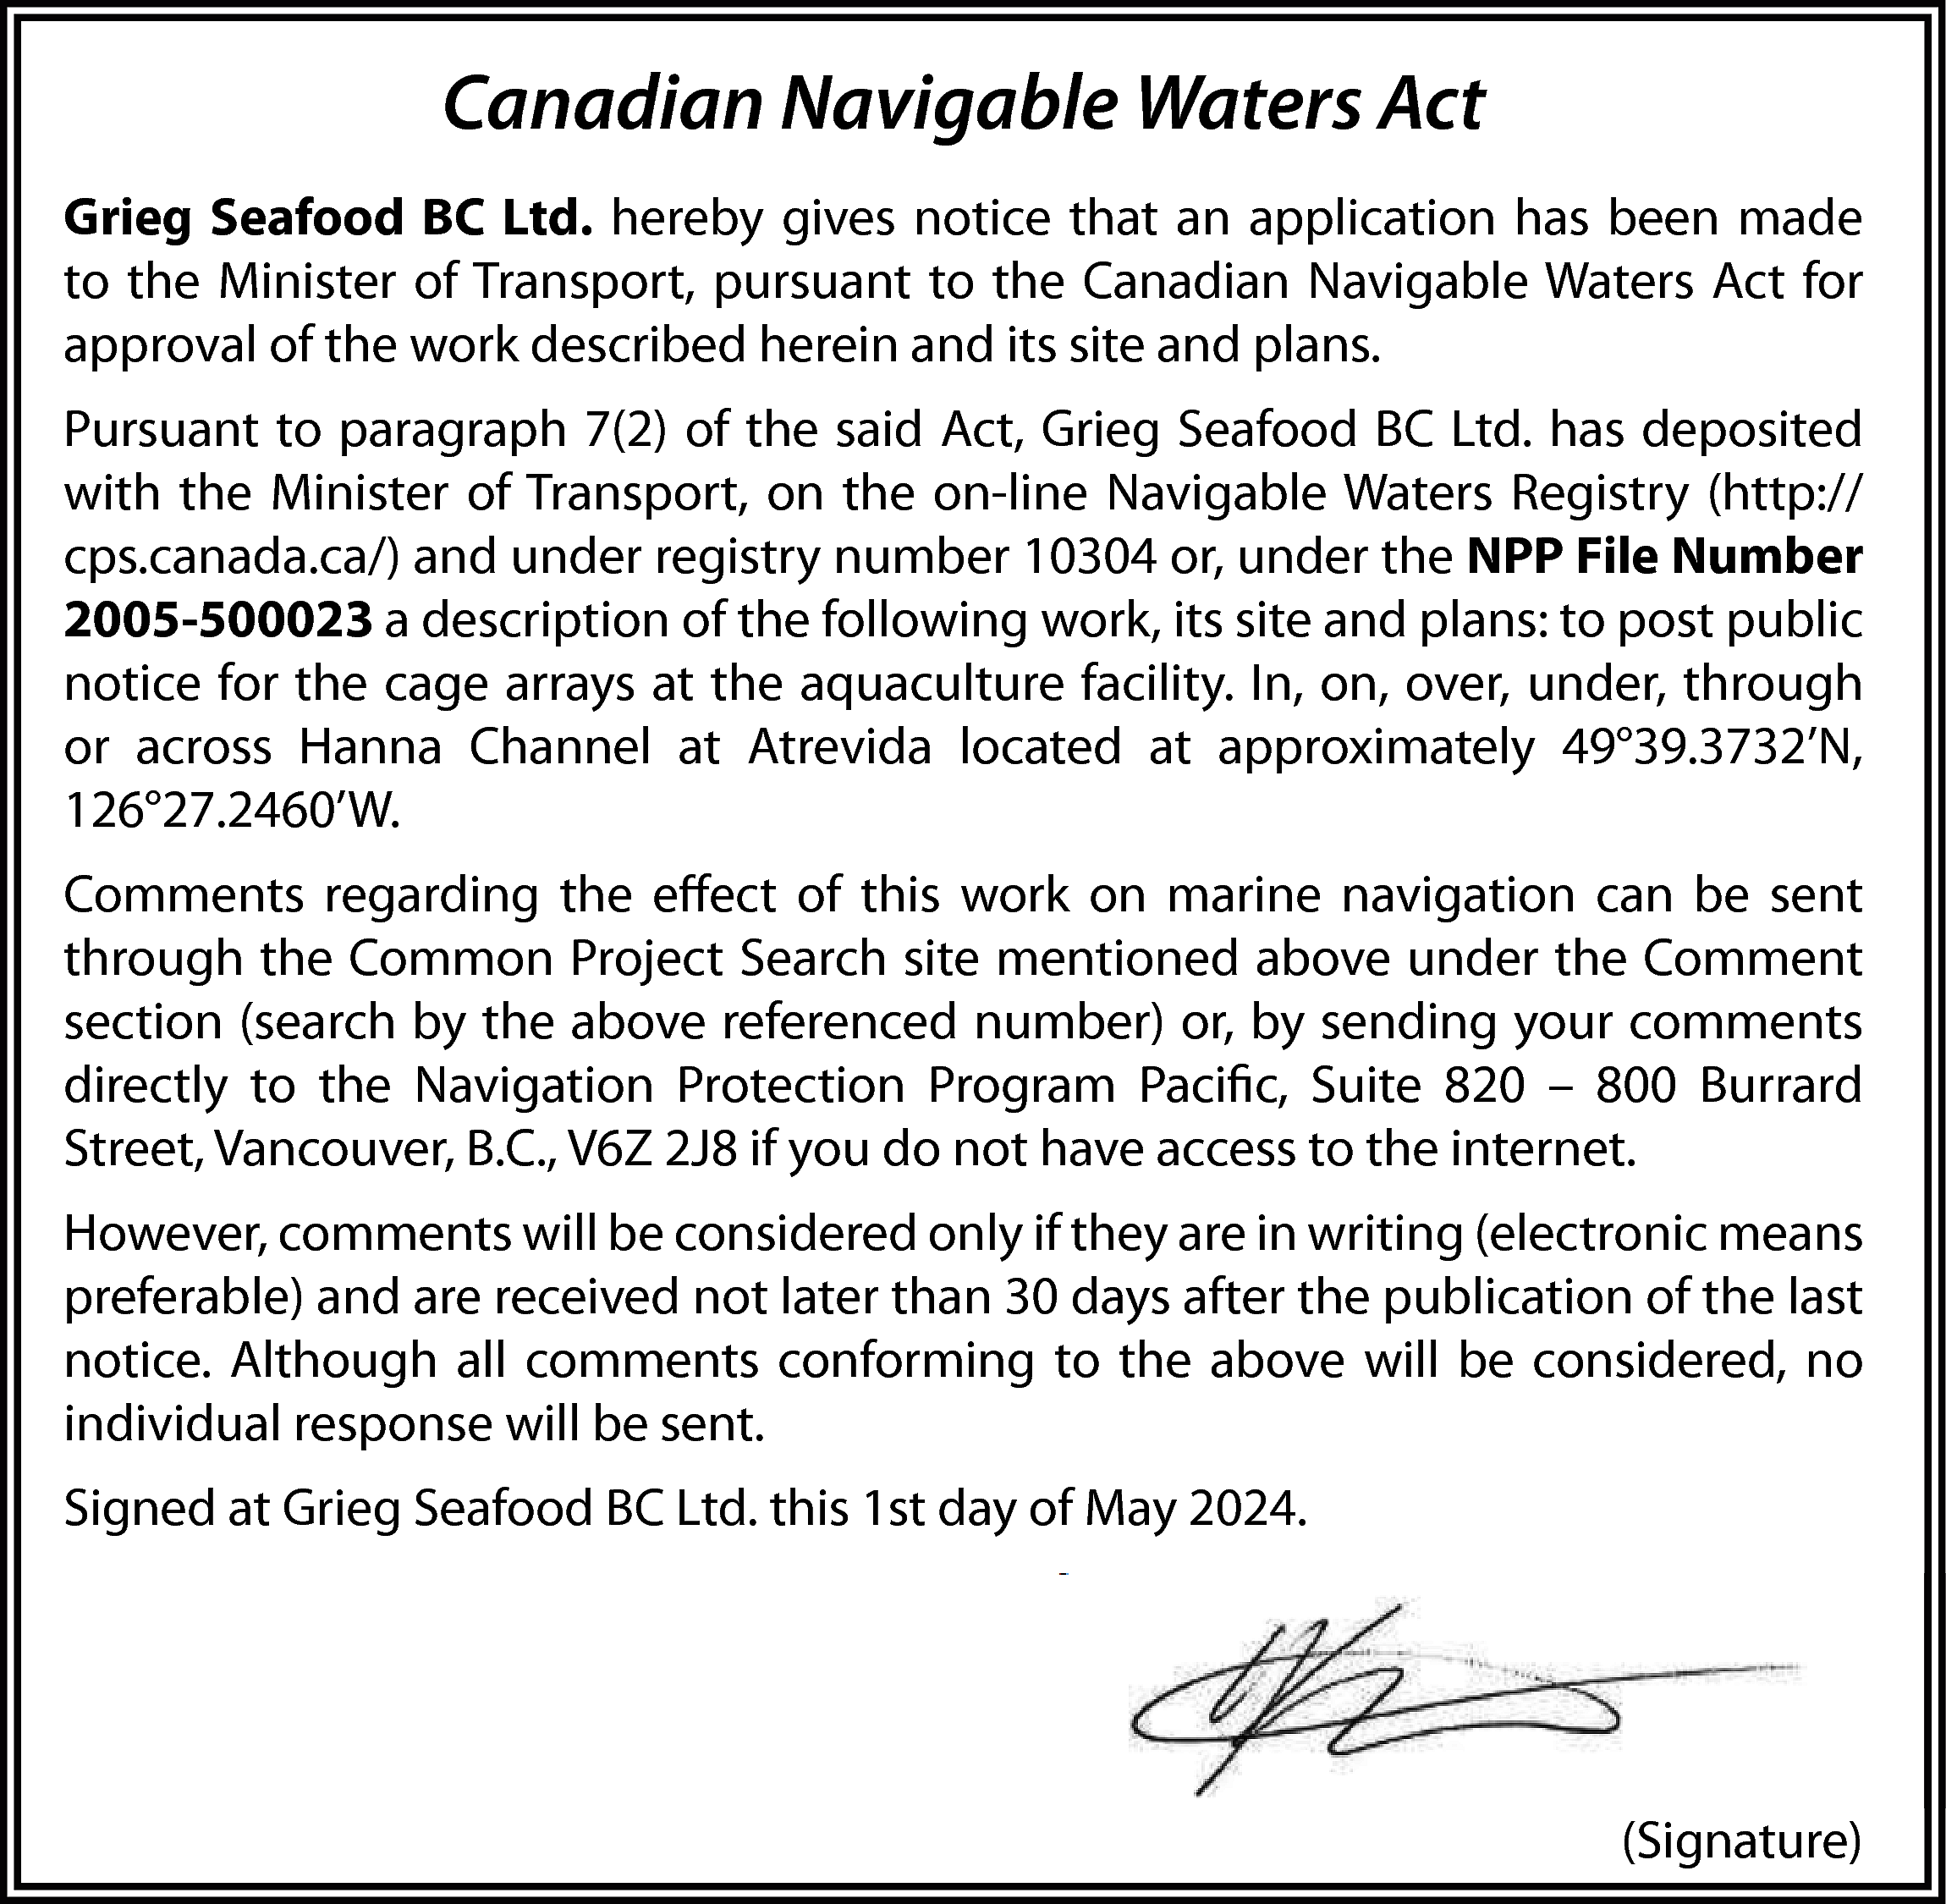 Canadian Navigable Waters Act <br>Grieg  Canadian Navigable Waters Act  Grieg Seafood BC Ltd. hereby gives notice that an application has been made  to the Minister of Transport, pursuant to the Canadian Navigable Waters Act for  approval of the work described herein and its site and plans.  Pursuant to paragraph 7(2) of the said Act, Grieg Seafood BC Ltd. has deposited  with the Minister of Transport, on the on-line Navigable Waters Registry (http://  cps.canada.ca/) and under registry number 10304 or, under the NPP File Number  2005-500023 a description of the following work, its site and plans: to post public  notice for the cage arrays at the aquaculture facility. In, on, over, under, through  or across Hanna Channel at Atrevida located at approximately 49°39.3732’N,  126°27.2460’W.  Comments regarding the effect of this work on marine navigation can be sent  through the Common Project Search site mentioned above under the Comment  section (search by the above referenced number) or, by sending your comments  directly to the Navigation Protection Program Pacific, Suite 820 – 800 Burrard  Street, Vancouver, B.C., V6Z 2J8 if you do not have access to the internet.  However, comments will be considered only if they are in writing (electronic means  preferable) and are received not later than 30 days after the publication of the last  notice. Although all comments conforming to the above will be considered, no  individual response will be sent.  Signed at Grieg Seafood BC Ltd. this 1st day of May 2024.    (Signature)    